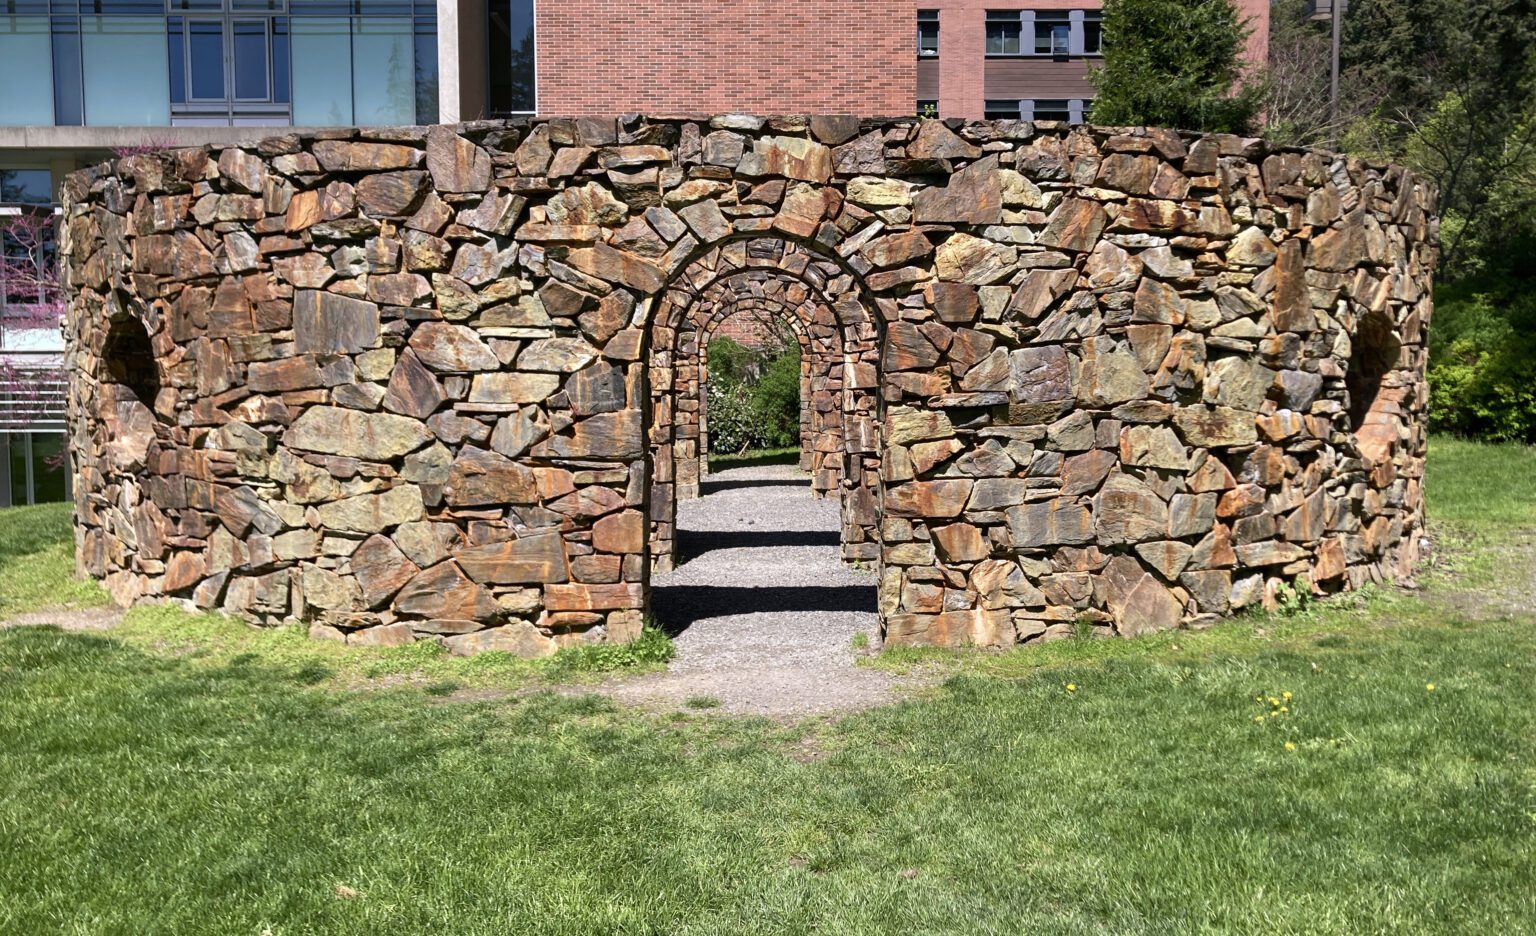 "Stone Enclosure: Rock Rings" was designed by Nancy Holt